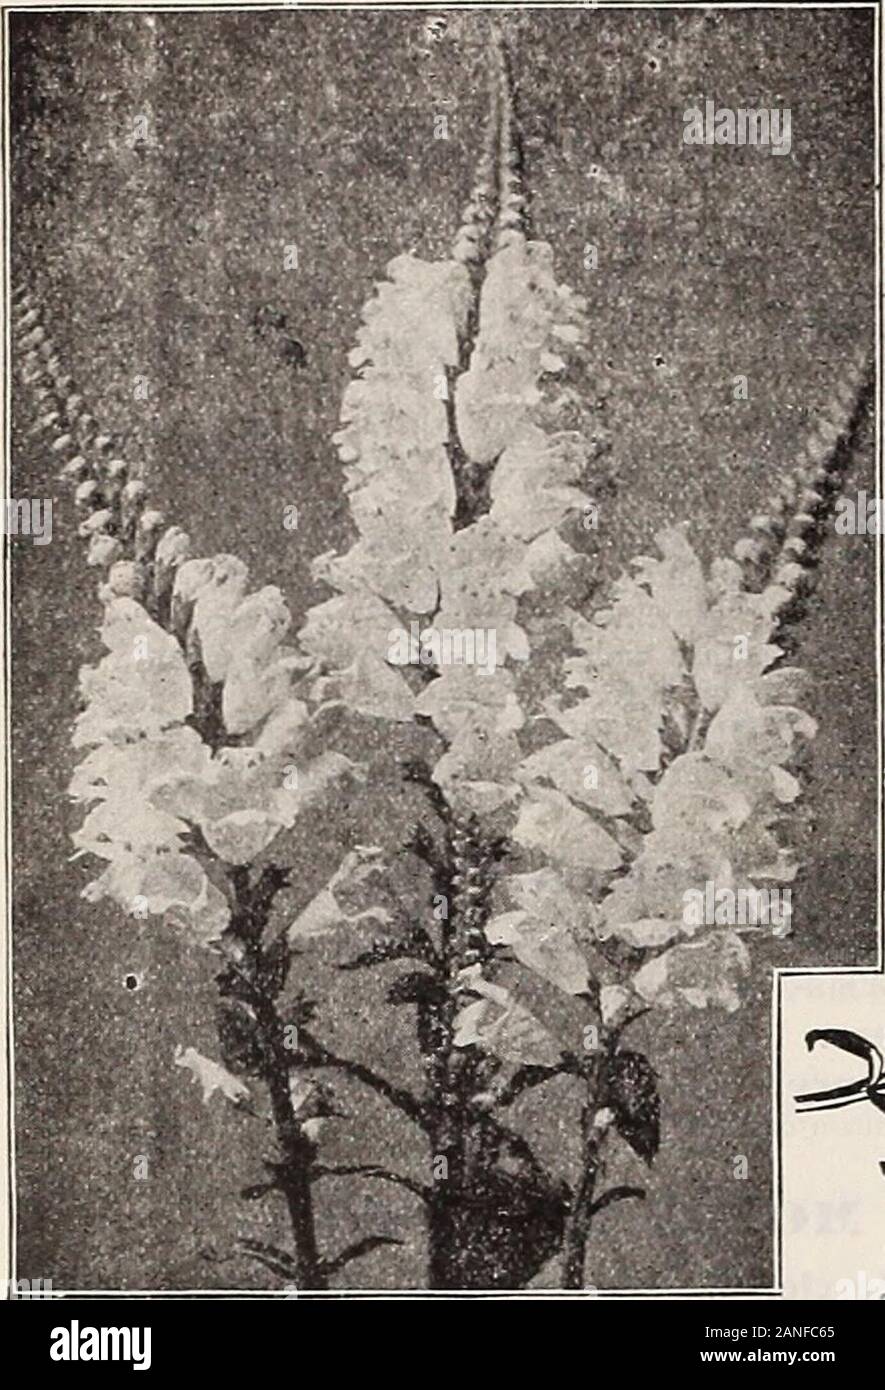 Dreer's 72nd annual edition garden book : 1910 . Phvsostegia. PHYSOSTEGIA (Fal.e Dragon-Head). One of the most beautiful of our niid-summer-flowering perennials,forming dense bushes 3 to 4 feet high, bearing spikes of delicate tubularflowers not unlike a gigantic heather. (See cut.)Virginica. Bright but soft pink.•— alba. Pure white, very fine.— SpeciOSa. Very delicate pink. l.T cts. each; $1.50 per doz.; $;10.00 per 100. HARDY GARDBX PINKS. Old favorites, bearing their sweet clove-scented flowers in the greatc-tprofusion during May and June. They are indispensable for the edge ofthe hardy bor Stock Photo